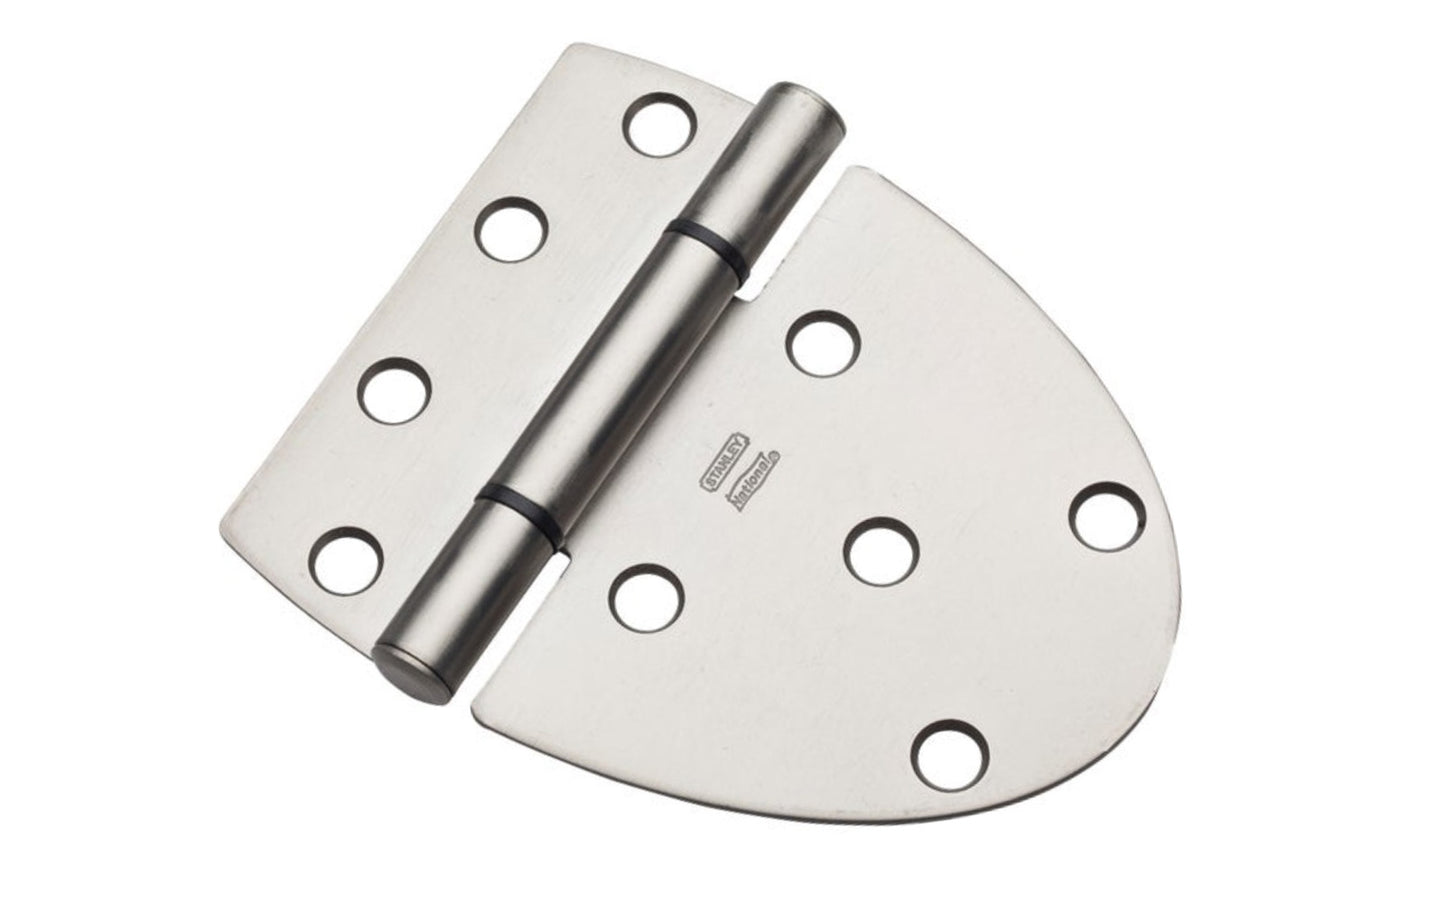 3-5/8" Satin Nickel Heavy Duty Gate Hinge. For gates, sheds, & barn doors. WeatherGuard for maximum protection from the outdoor elements. Safe working load 48 lbs. National Catalog Model V4870. 038613900257